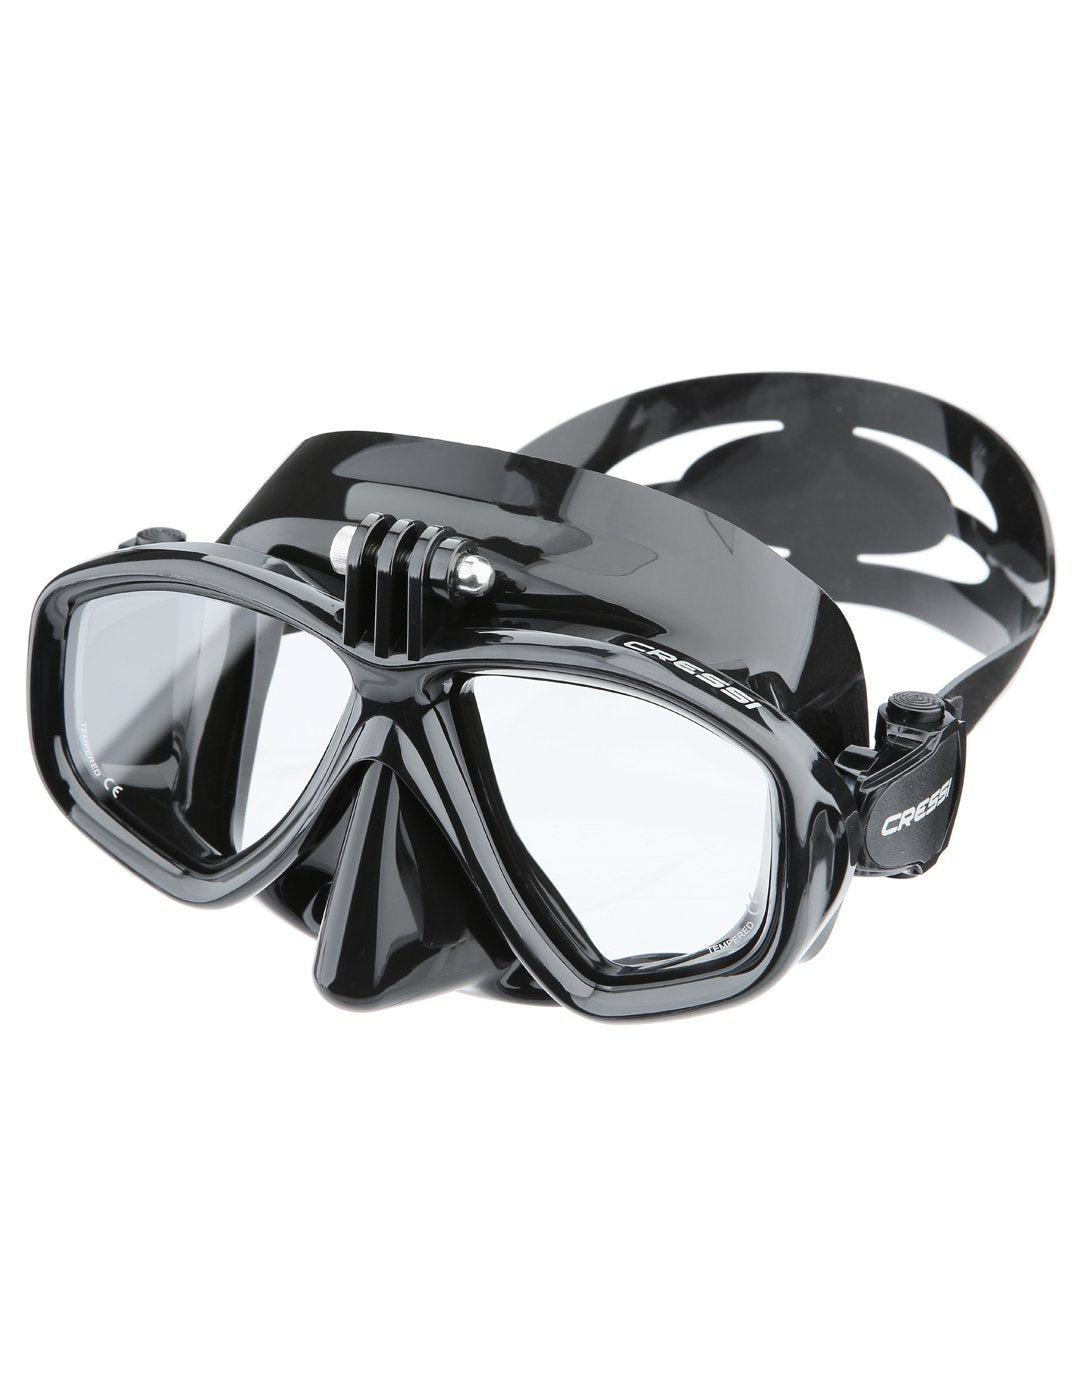 Cressi ACTION Scuba Diving Mask With Go Pro Camera Mount – HYDRONE